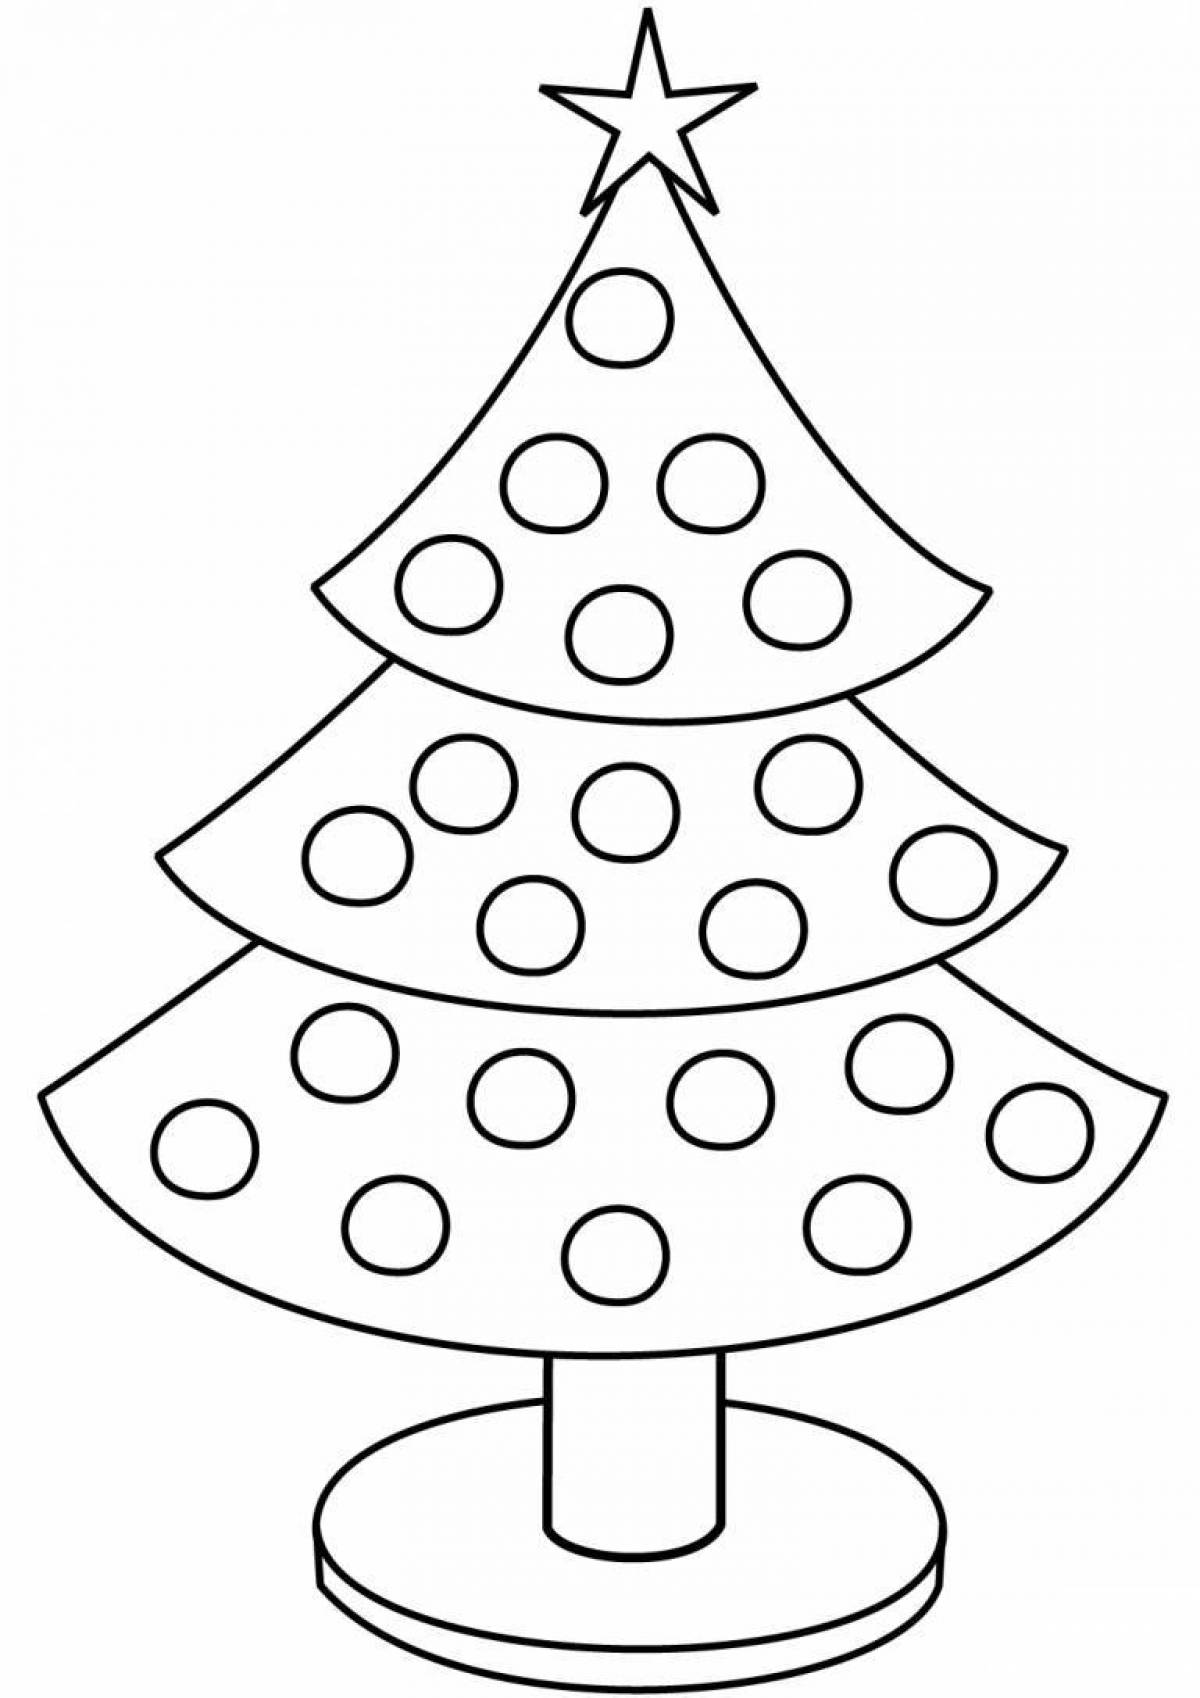 Fine Christmas tree coloring book